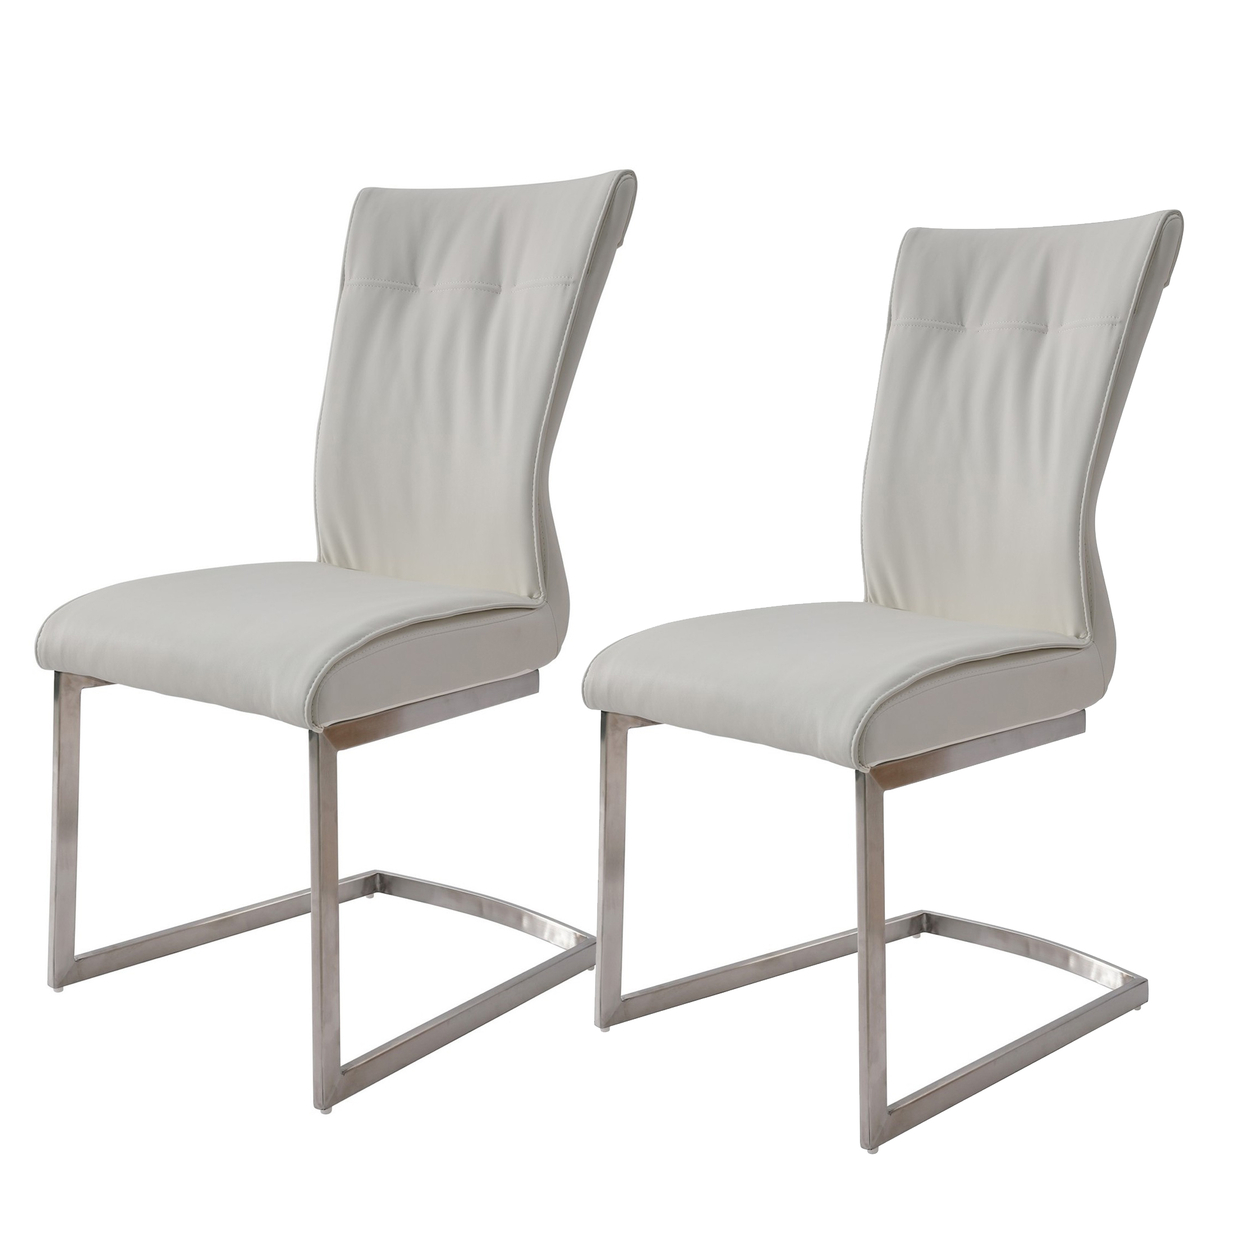 Leatherette Dining Chair With Breuer Base, White - Saltoro Sherpi